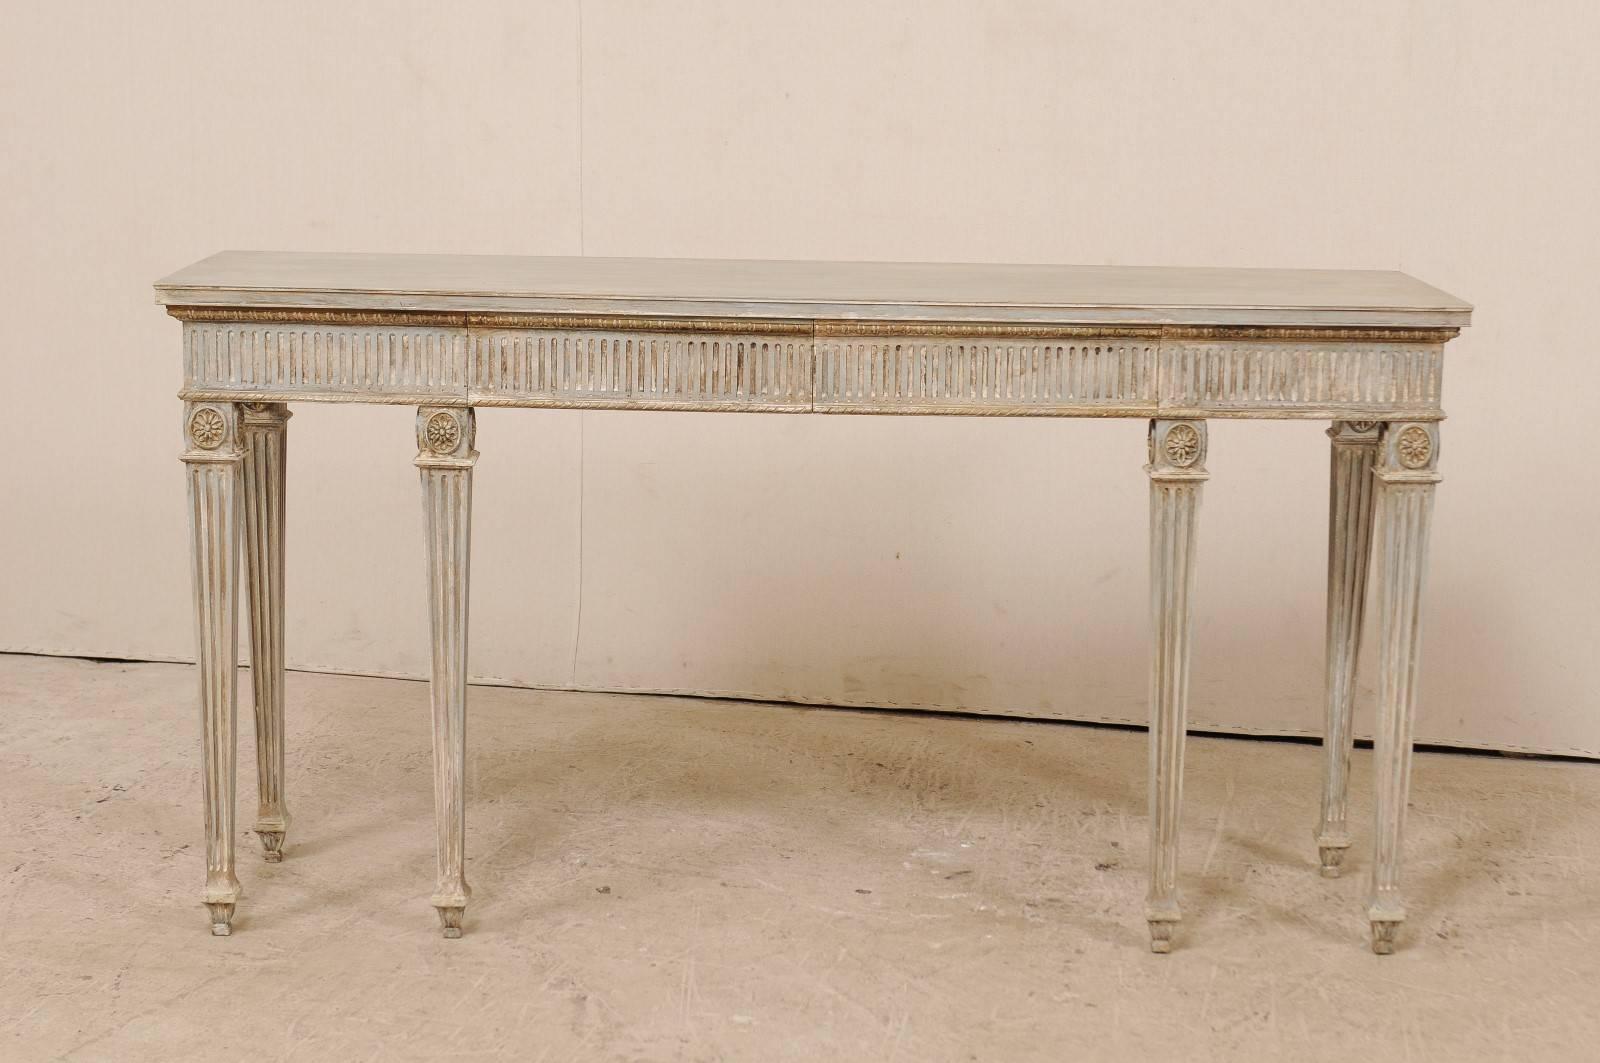 A Gustavian style carved wood console table. This vintage American console table has a beautiful Gustavian style and features fluting details about the apron and legs, roped trim molding, and carved floral medallions around each knee. The table is